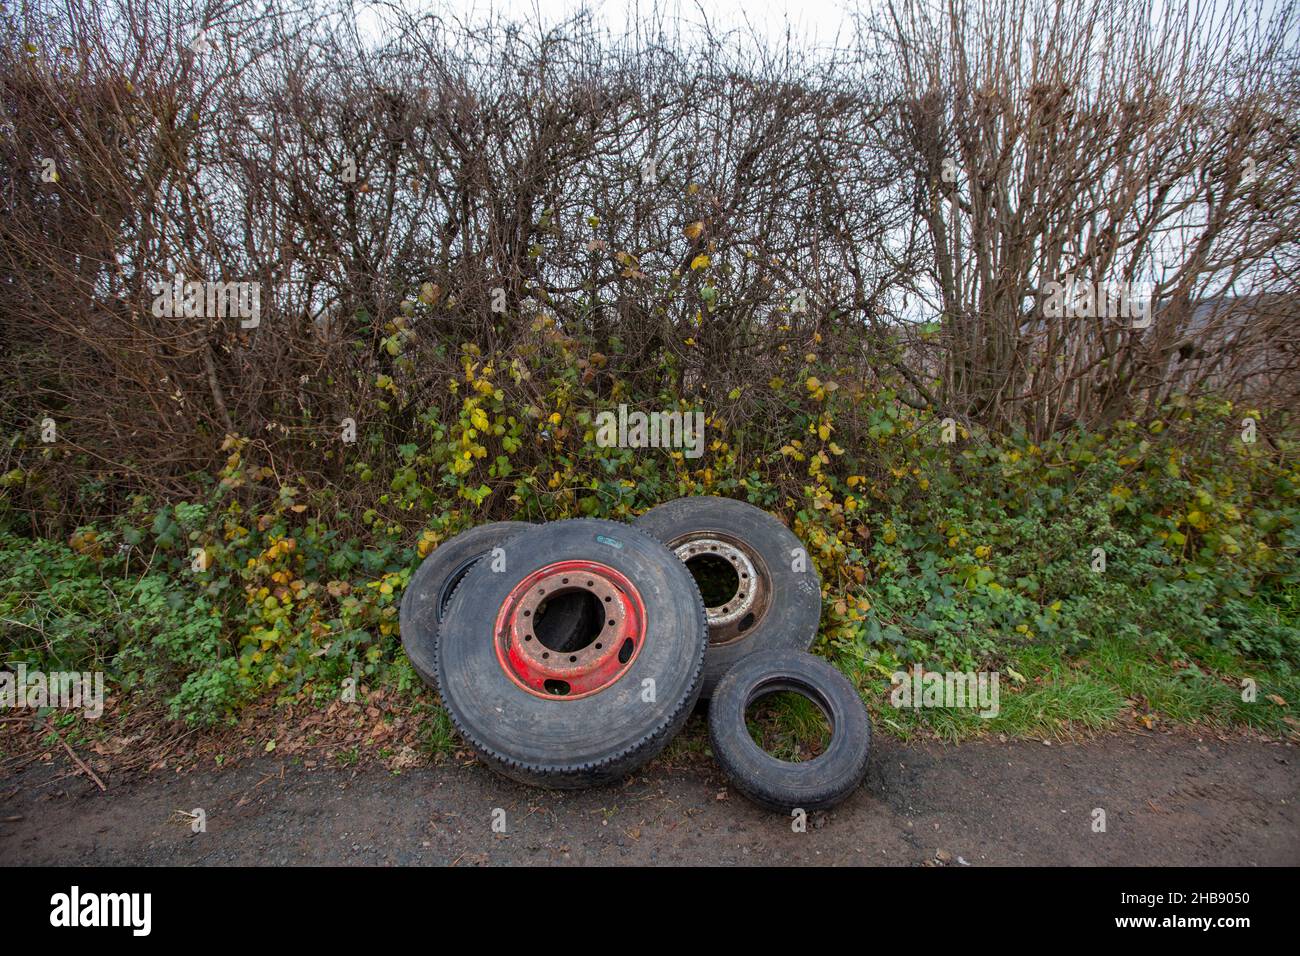 Discarded and dumped tyres lay in a hedgerow in a Worcestershire country lane causing an eyesore and possible future pollution. Stock Photo